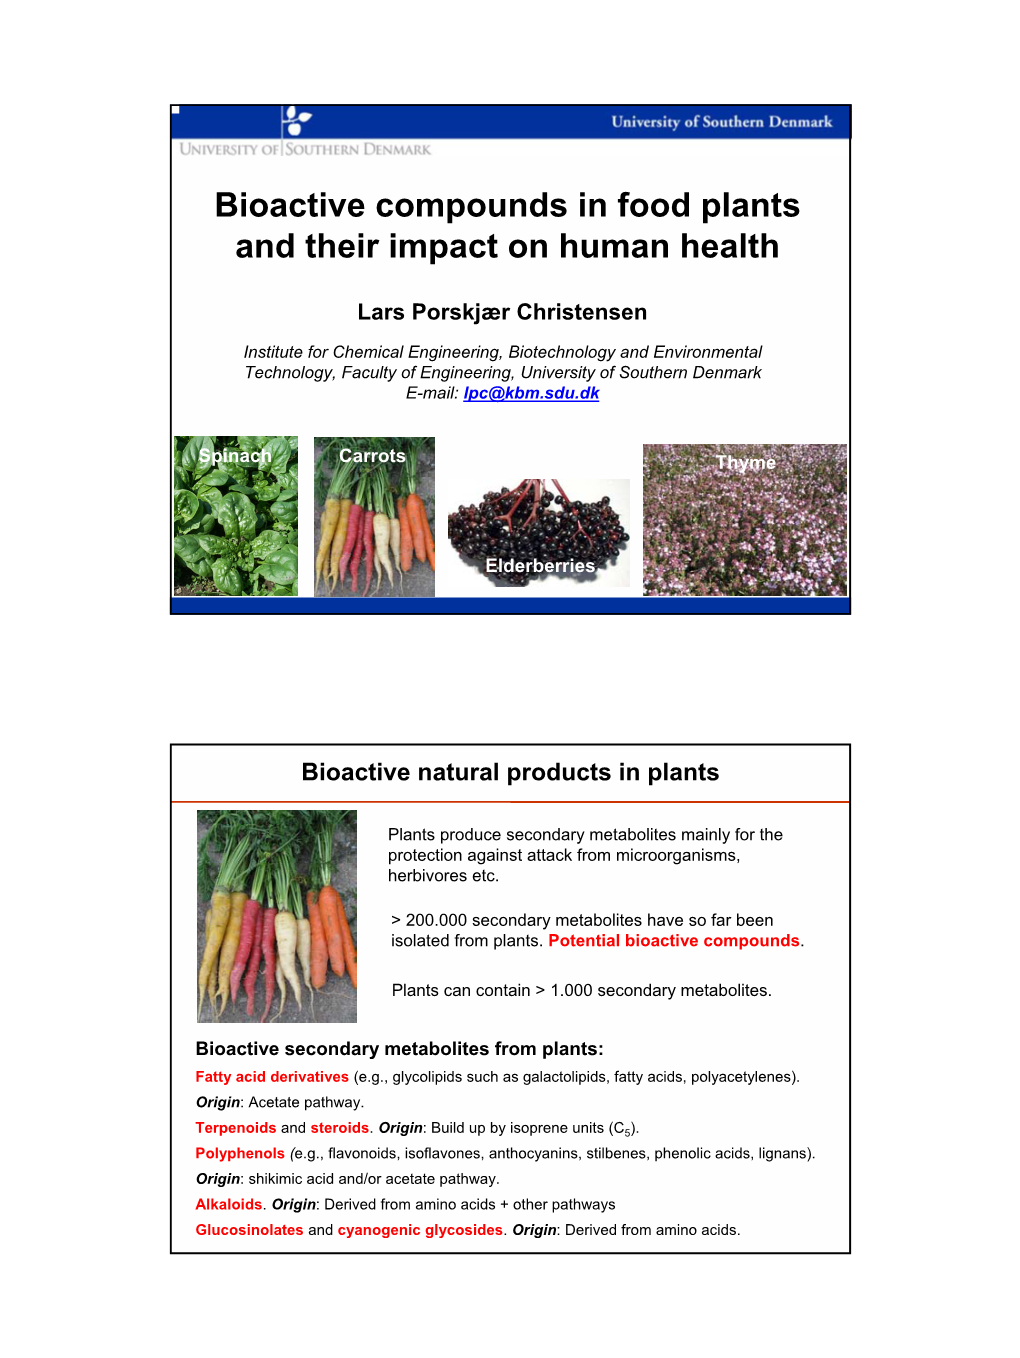 Bioactive Compounds in Food Plants and Their Impact on Human Health